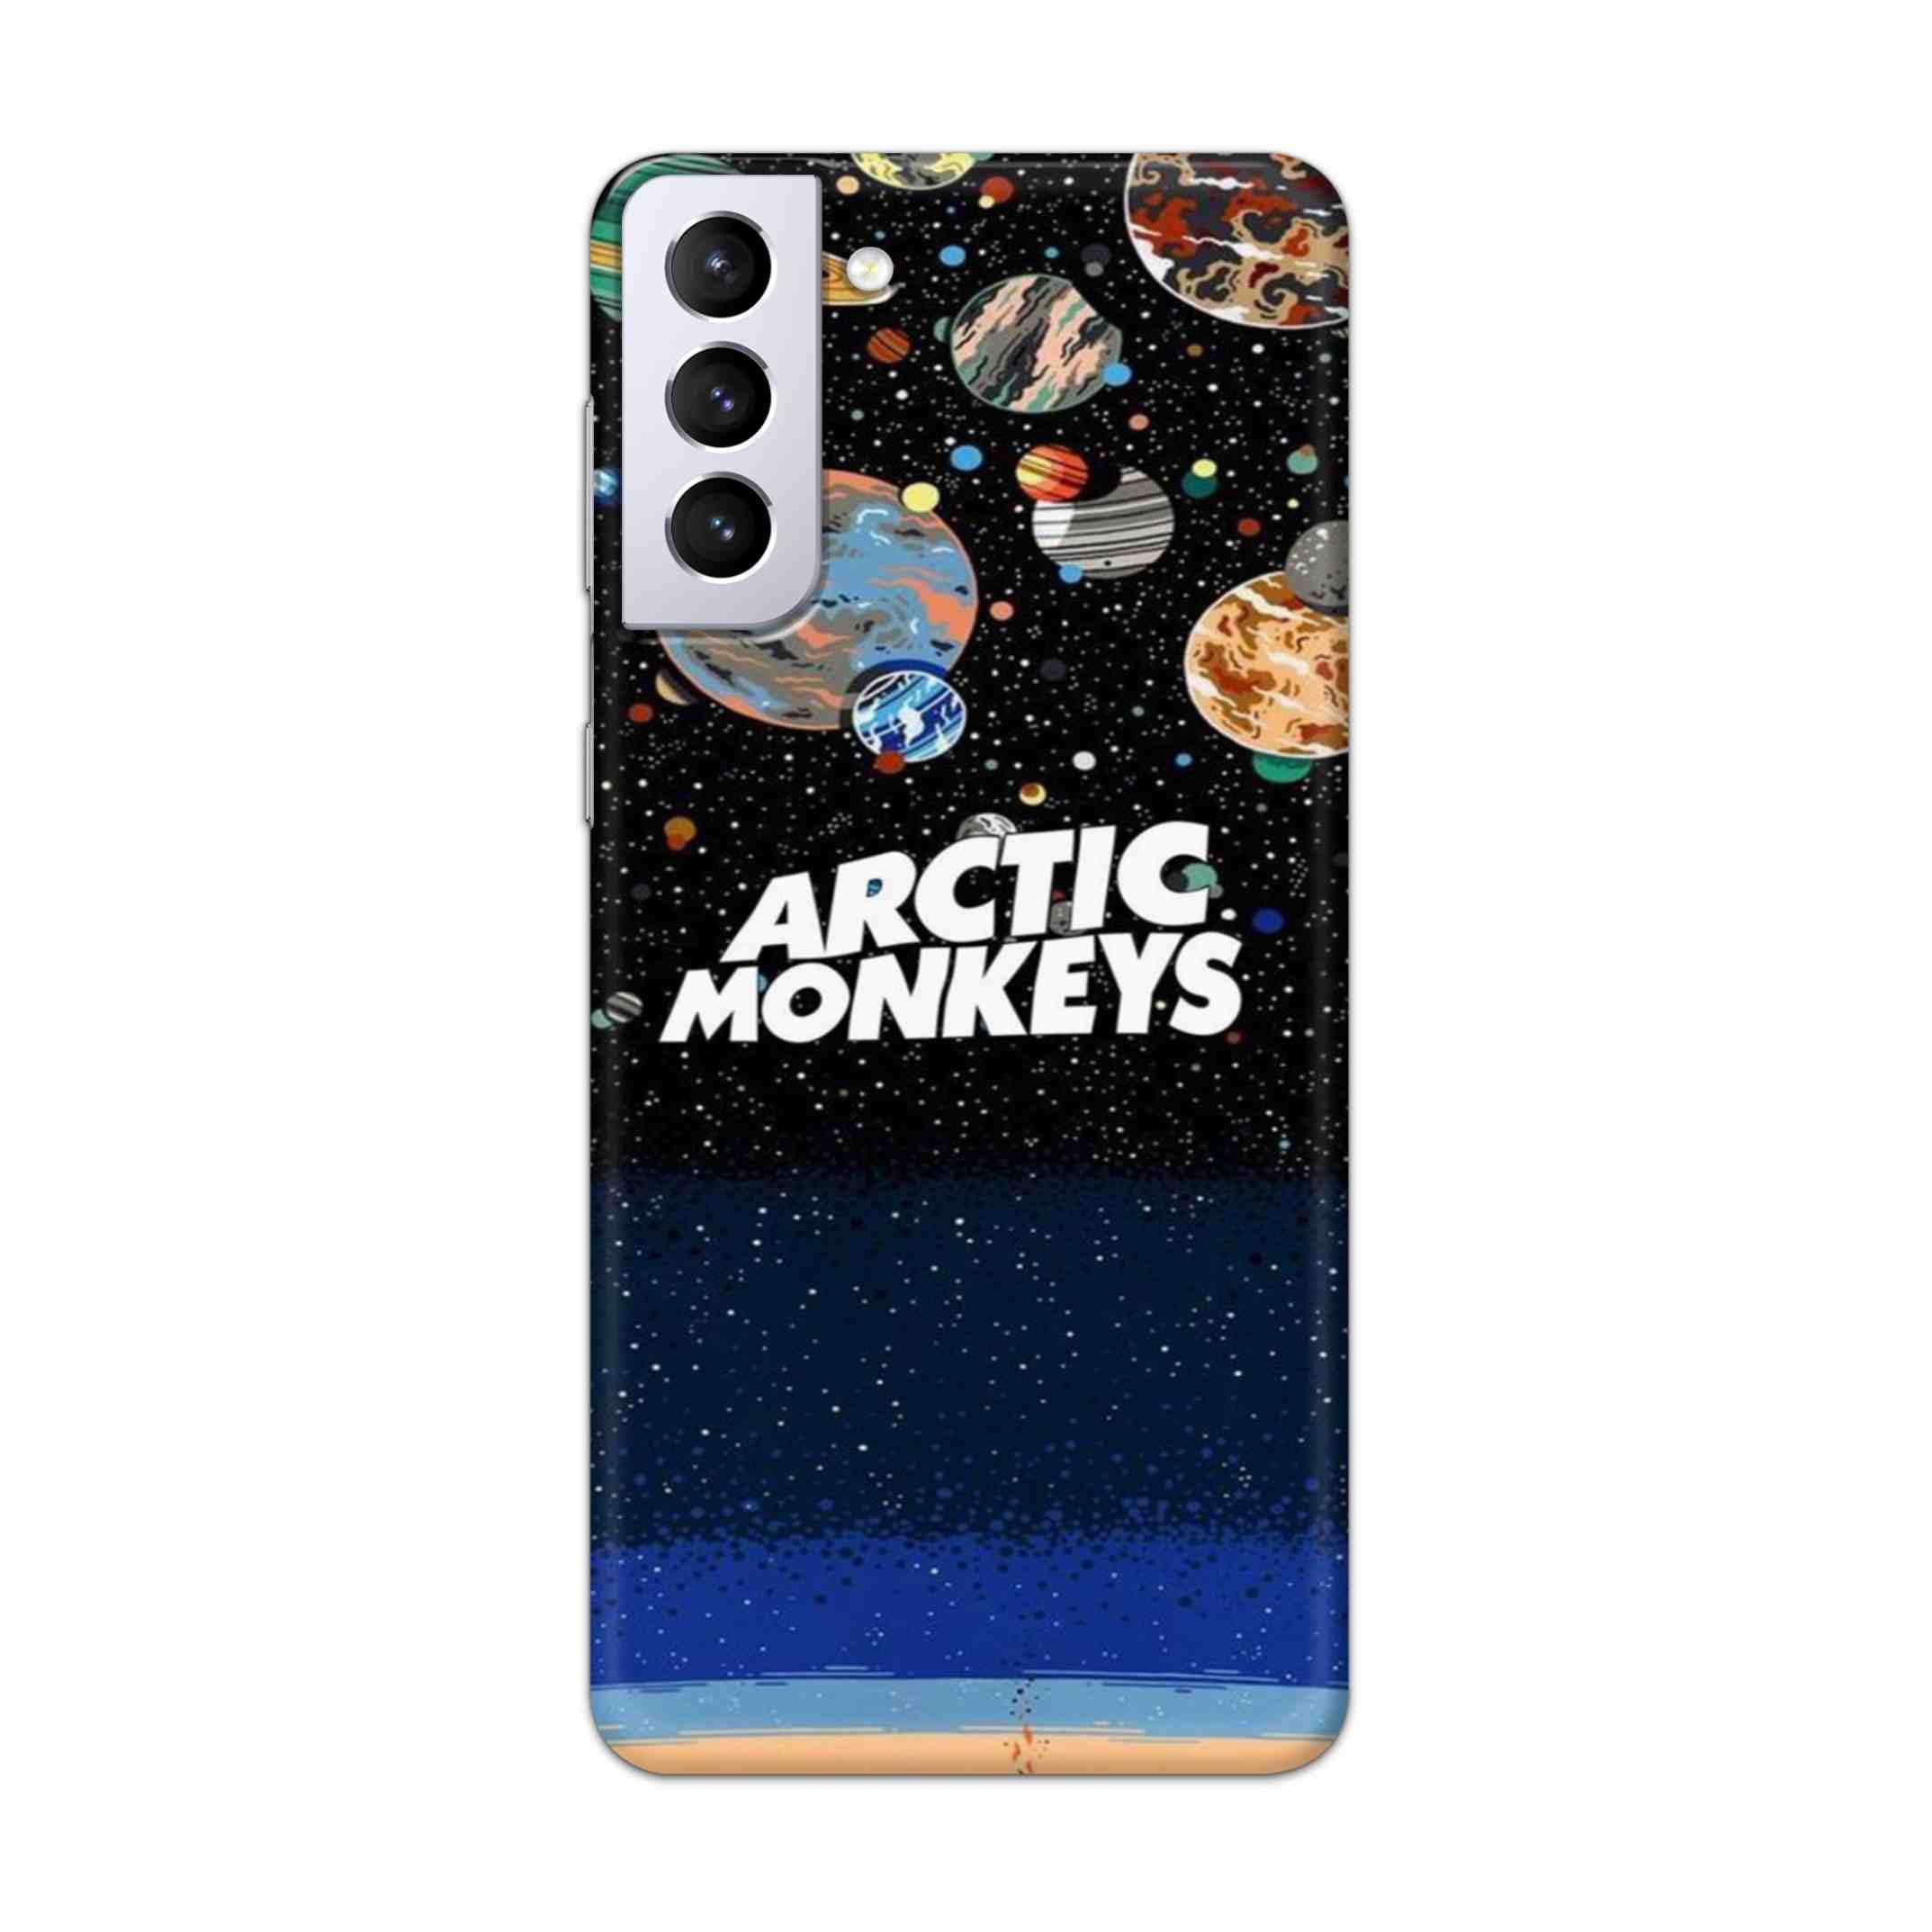 Buy Artic Monkeys Hard Back Mobile Phone Case Cover For Samsung Galaxy S21 Online